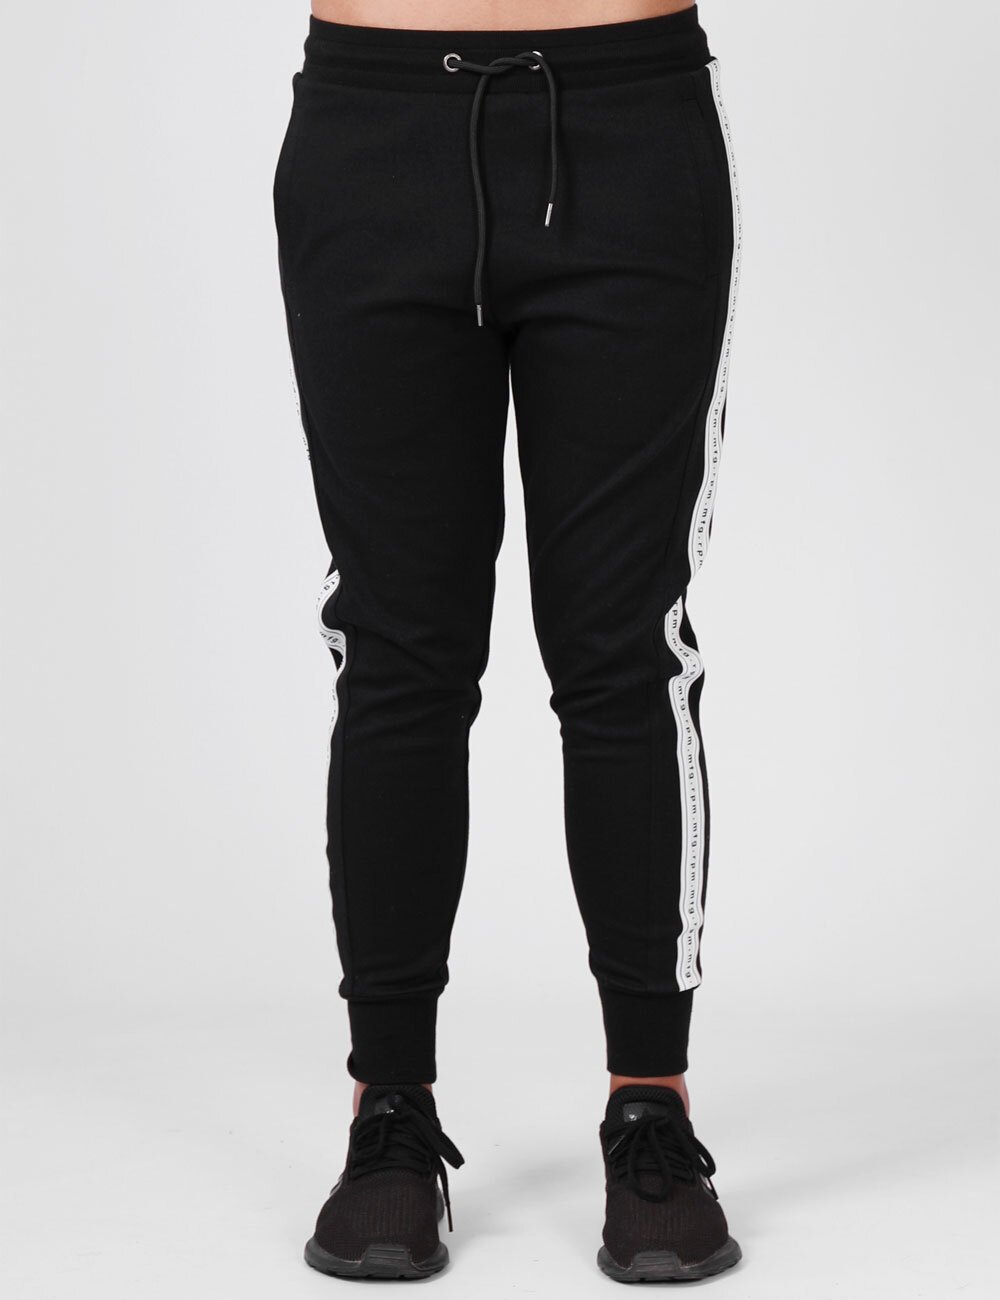 BLOCK TRACKY - Shop Women's Bottoms - Free NZ Wide Delivery Over $70 ...